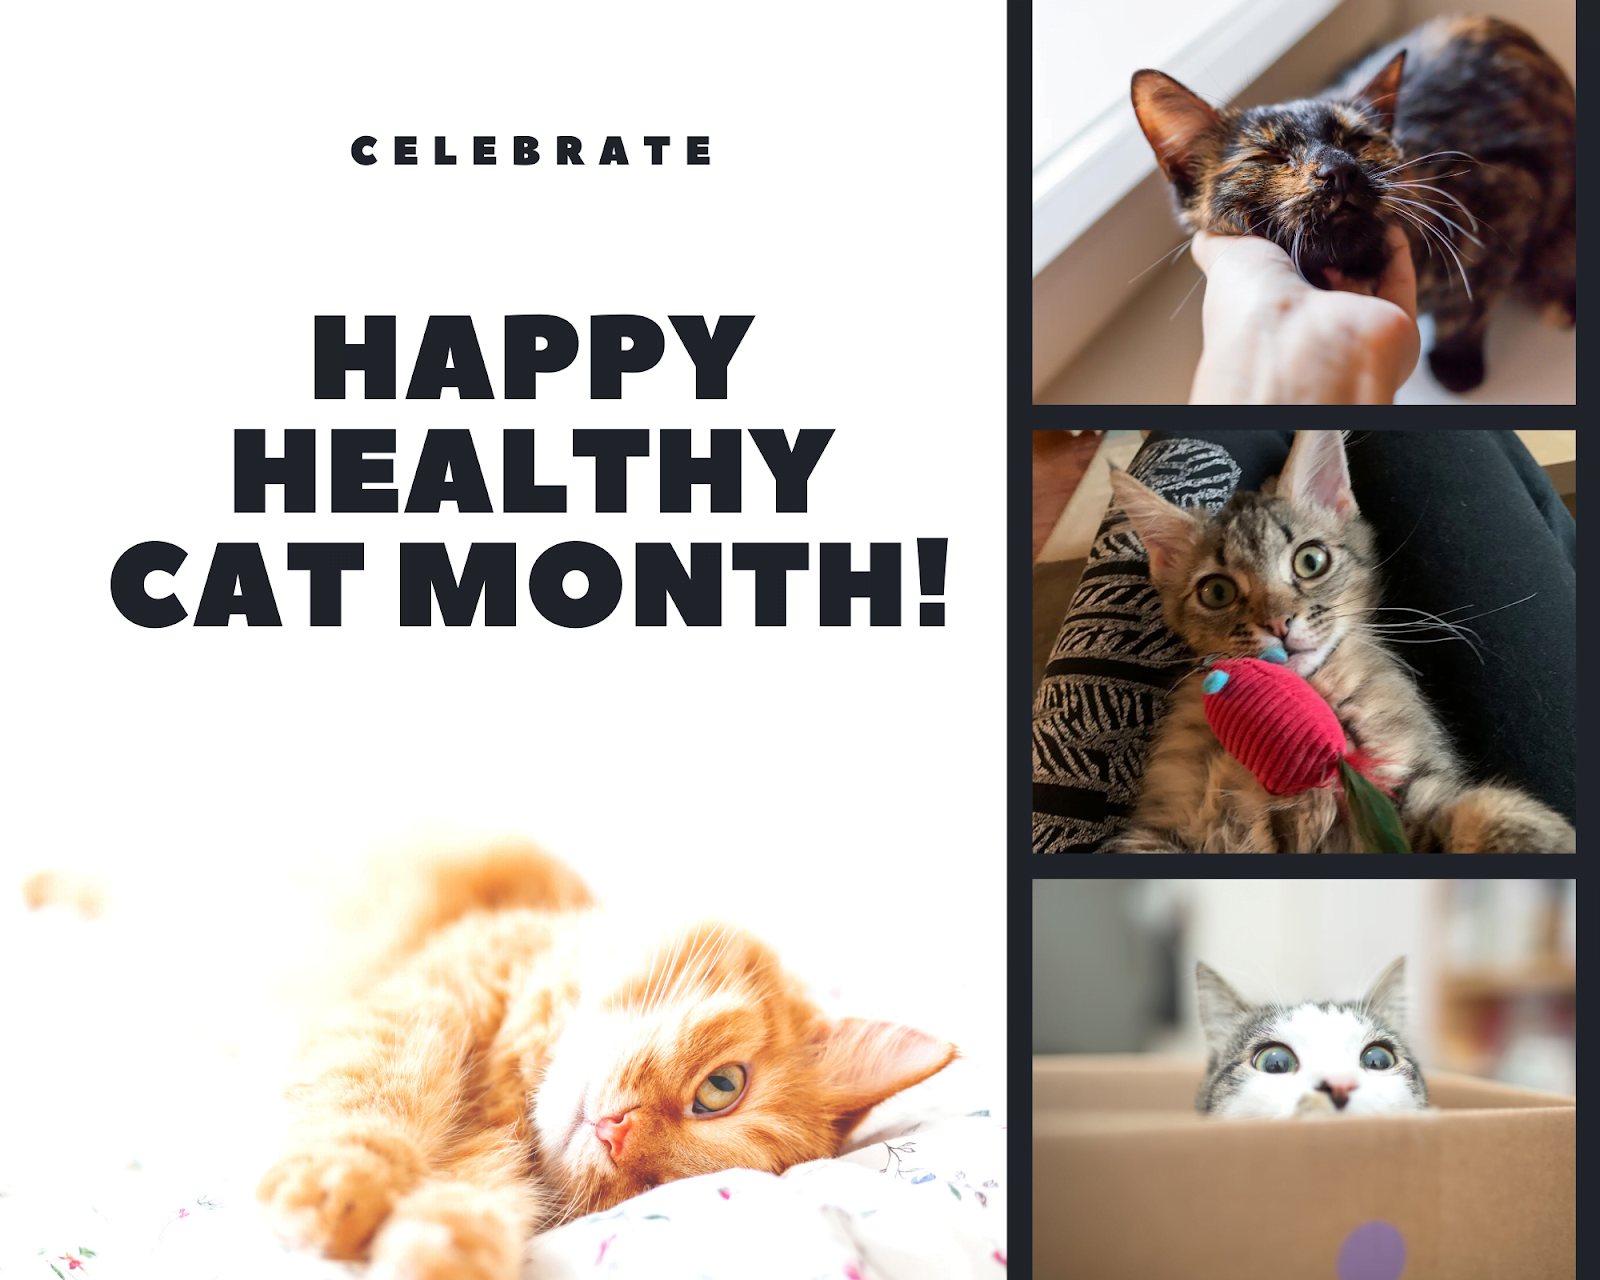 Celebrate Happy Healthy Cat Month in September